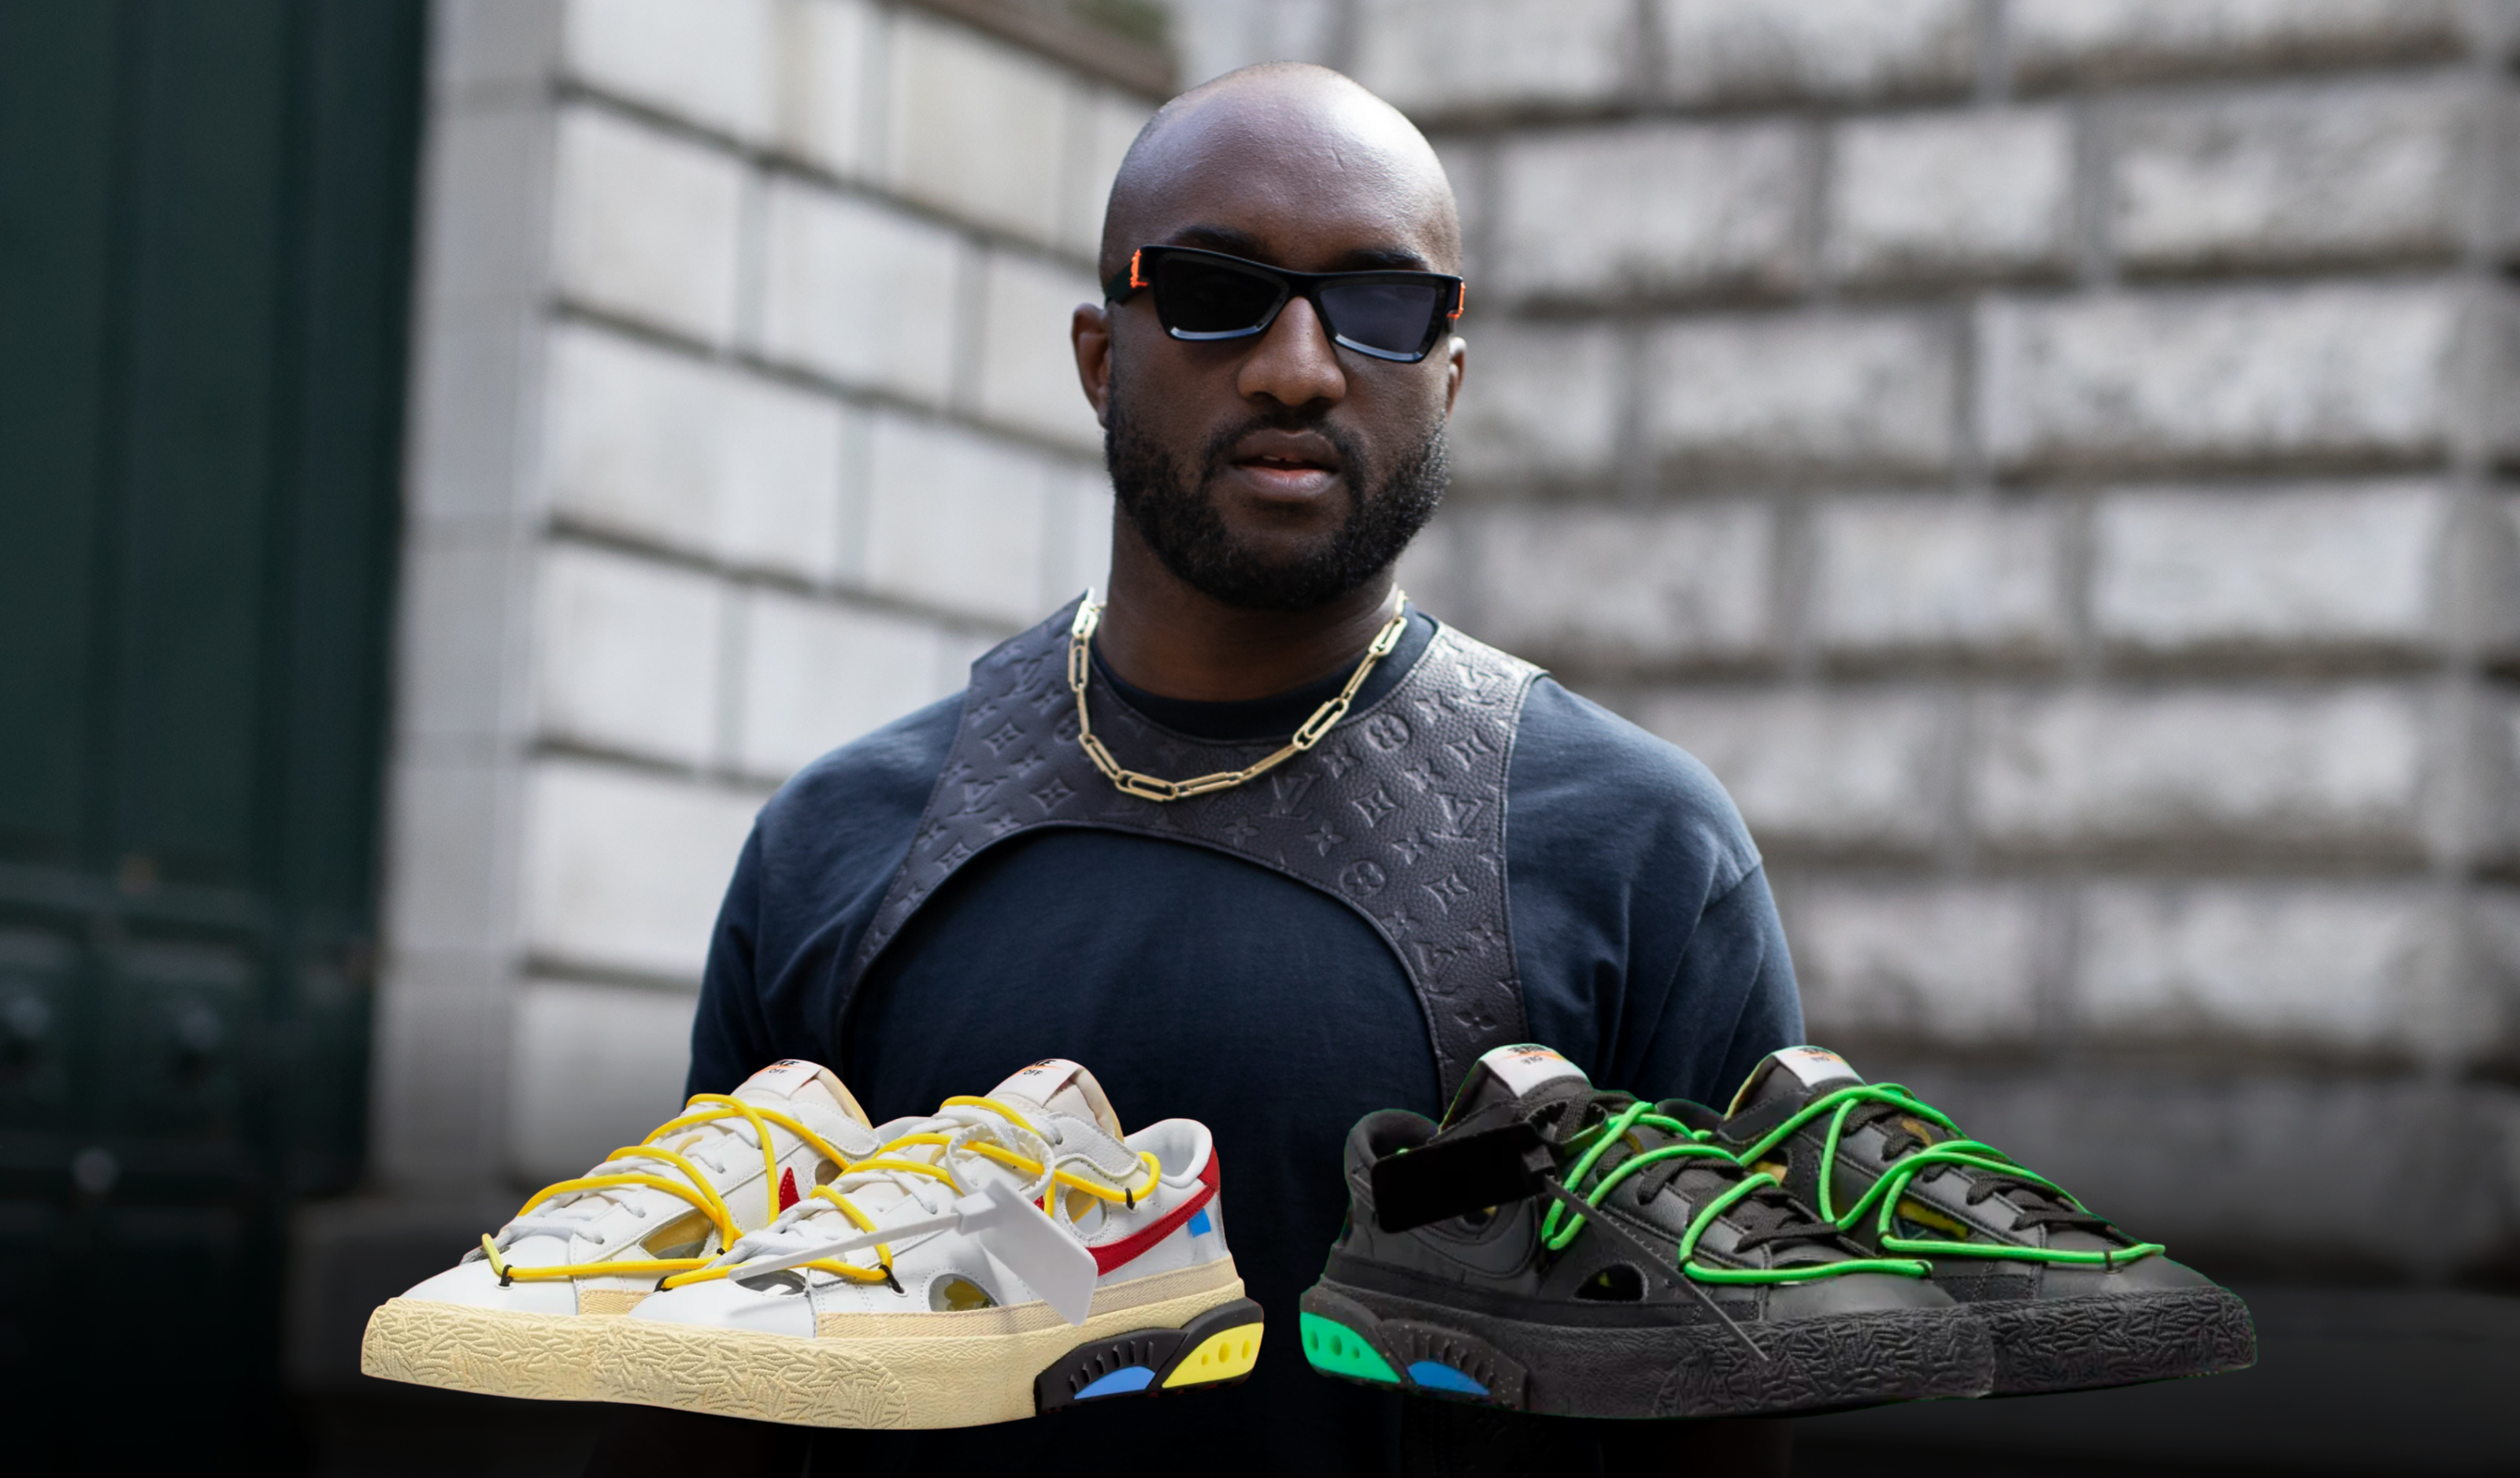 The Many Lives of Virgil Abloh's Off-White x Nike Blazer Low